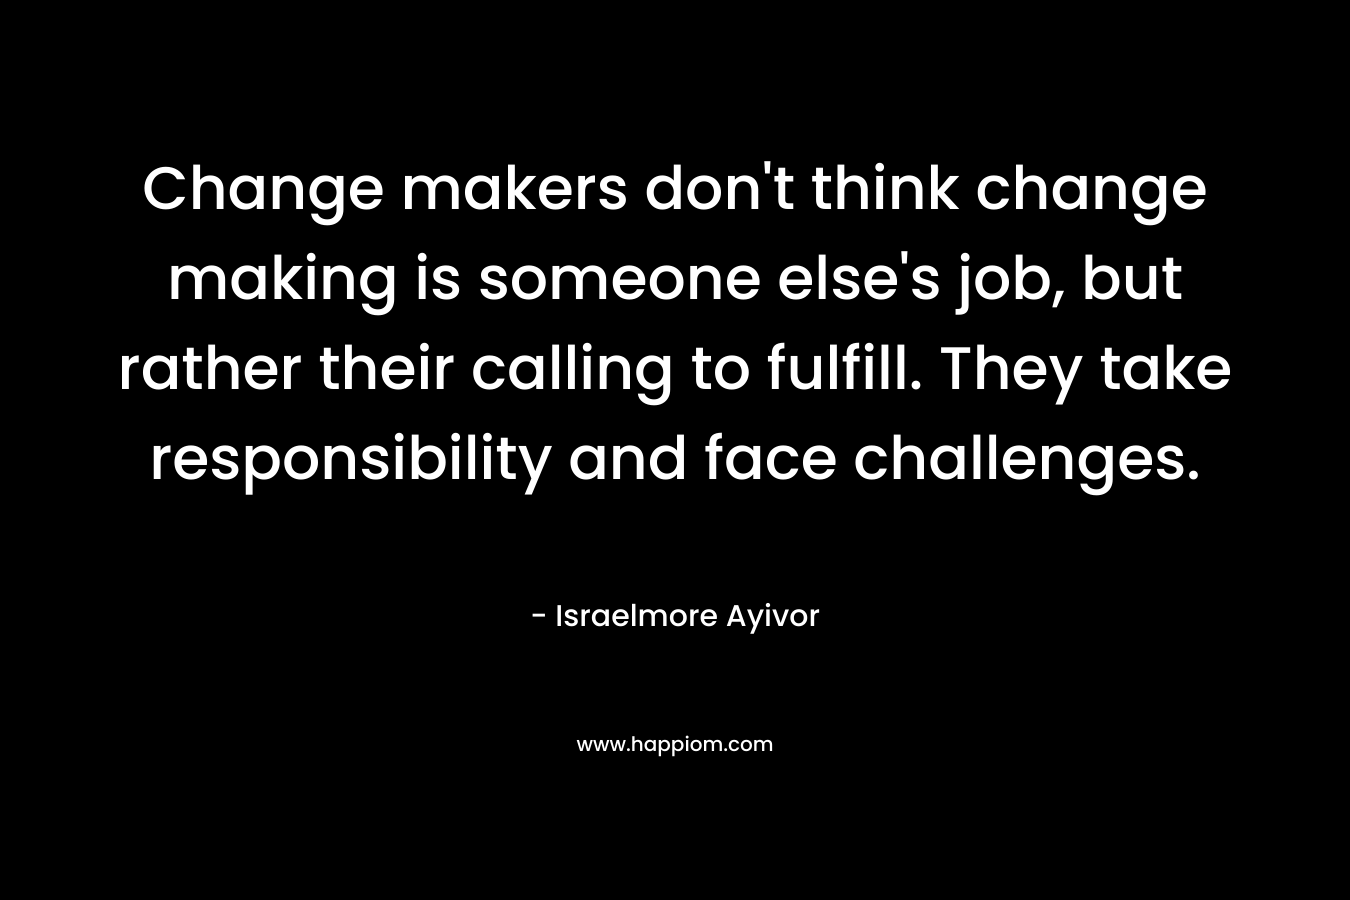 Change makers don't think change making is someone else's job, but rather their calling to fulfill. They take responsibility and face challenges.